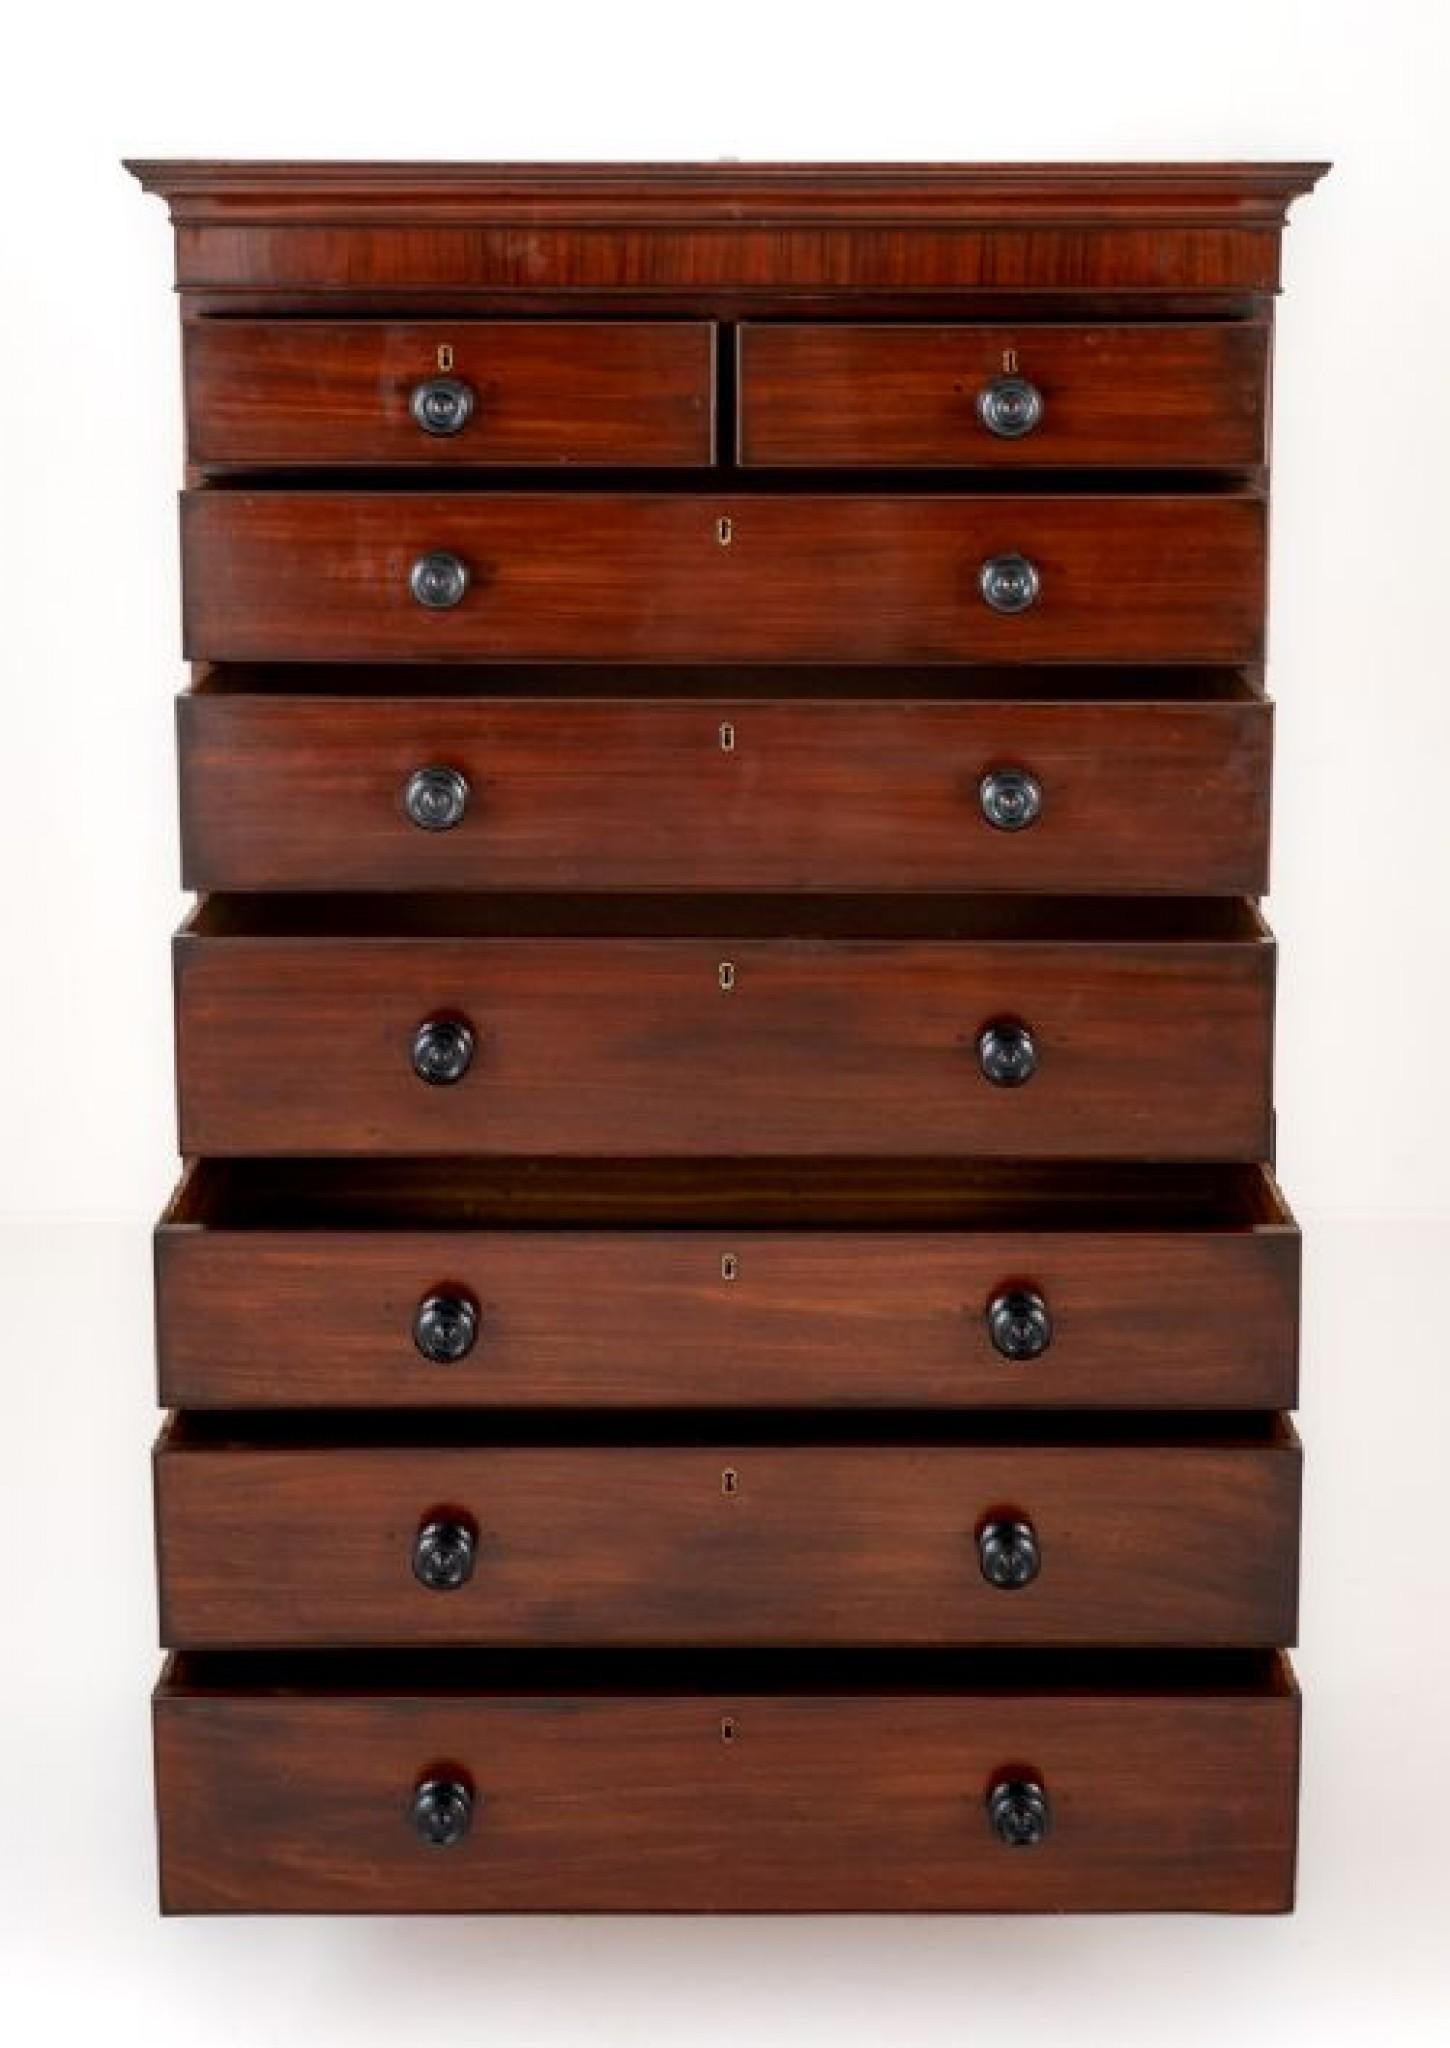 Here we have a good quality mahogany chest on chest.
Raised upon typical georgian bracket feet.
Georgian era
The lower section having 3 oak lined drawers and the upper section having 2 over 3 oak lined Drawers with Turned Knobs.
(note the Fine